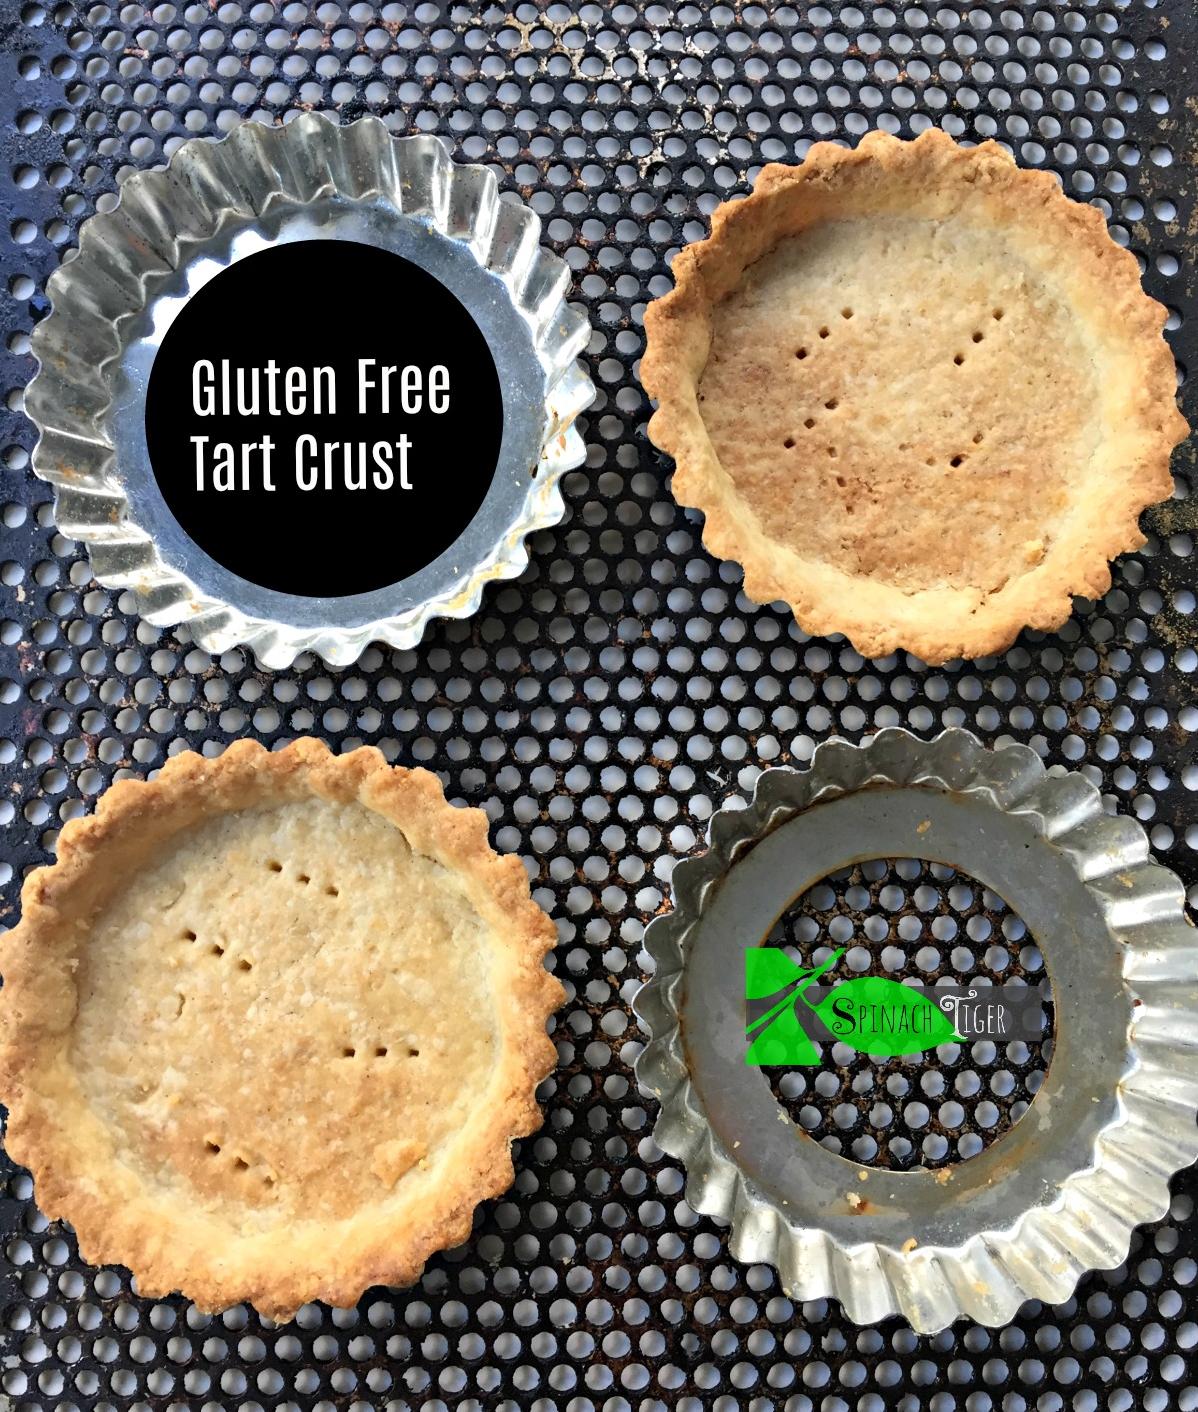  No gluten? No problem! This crust is easy and quick to make.